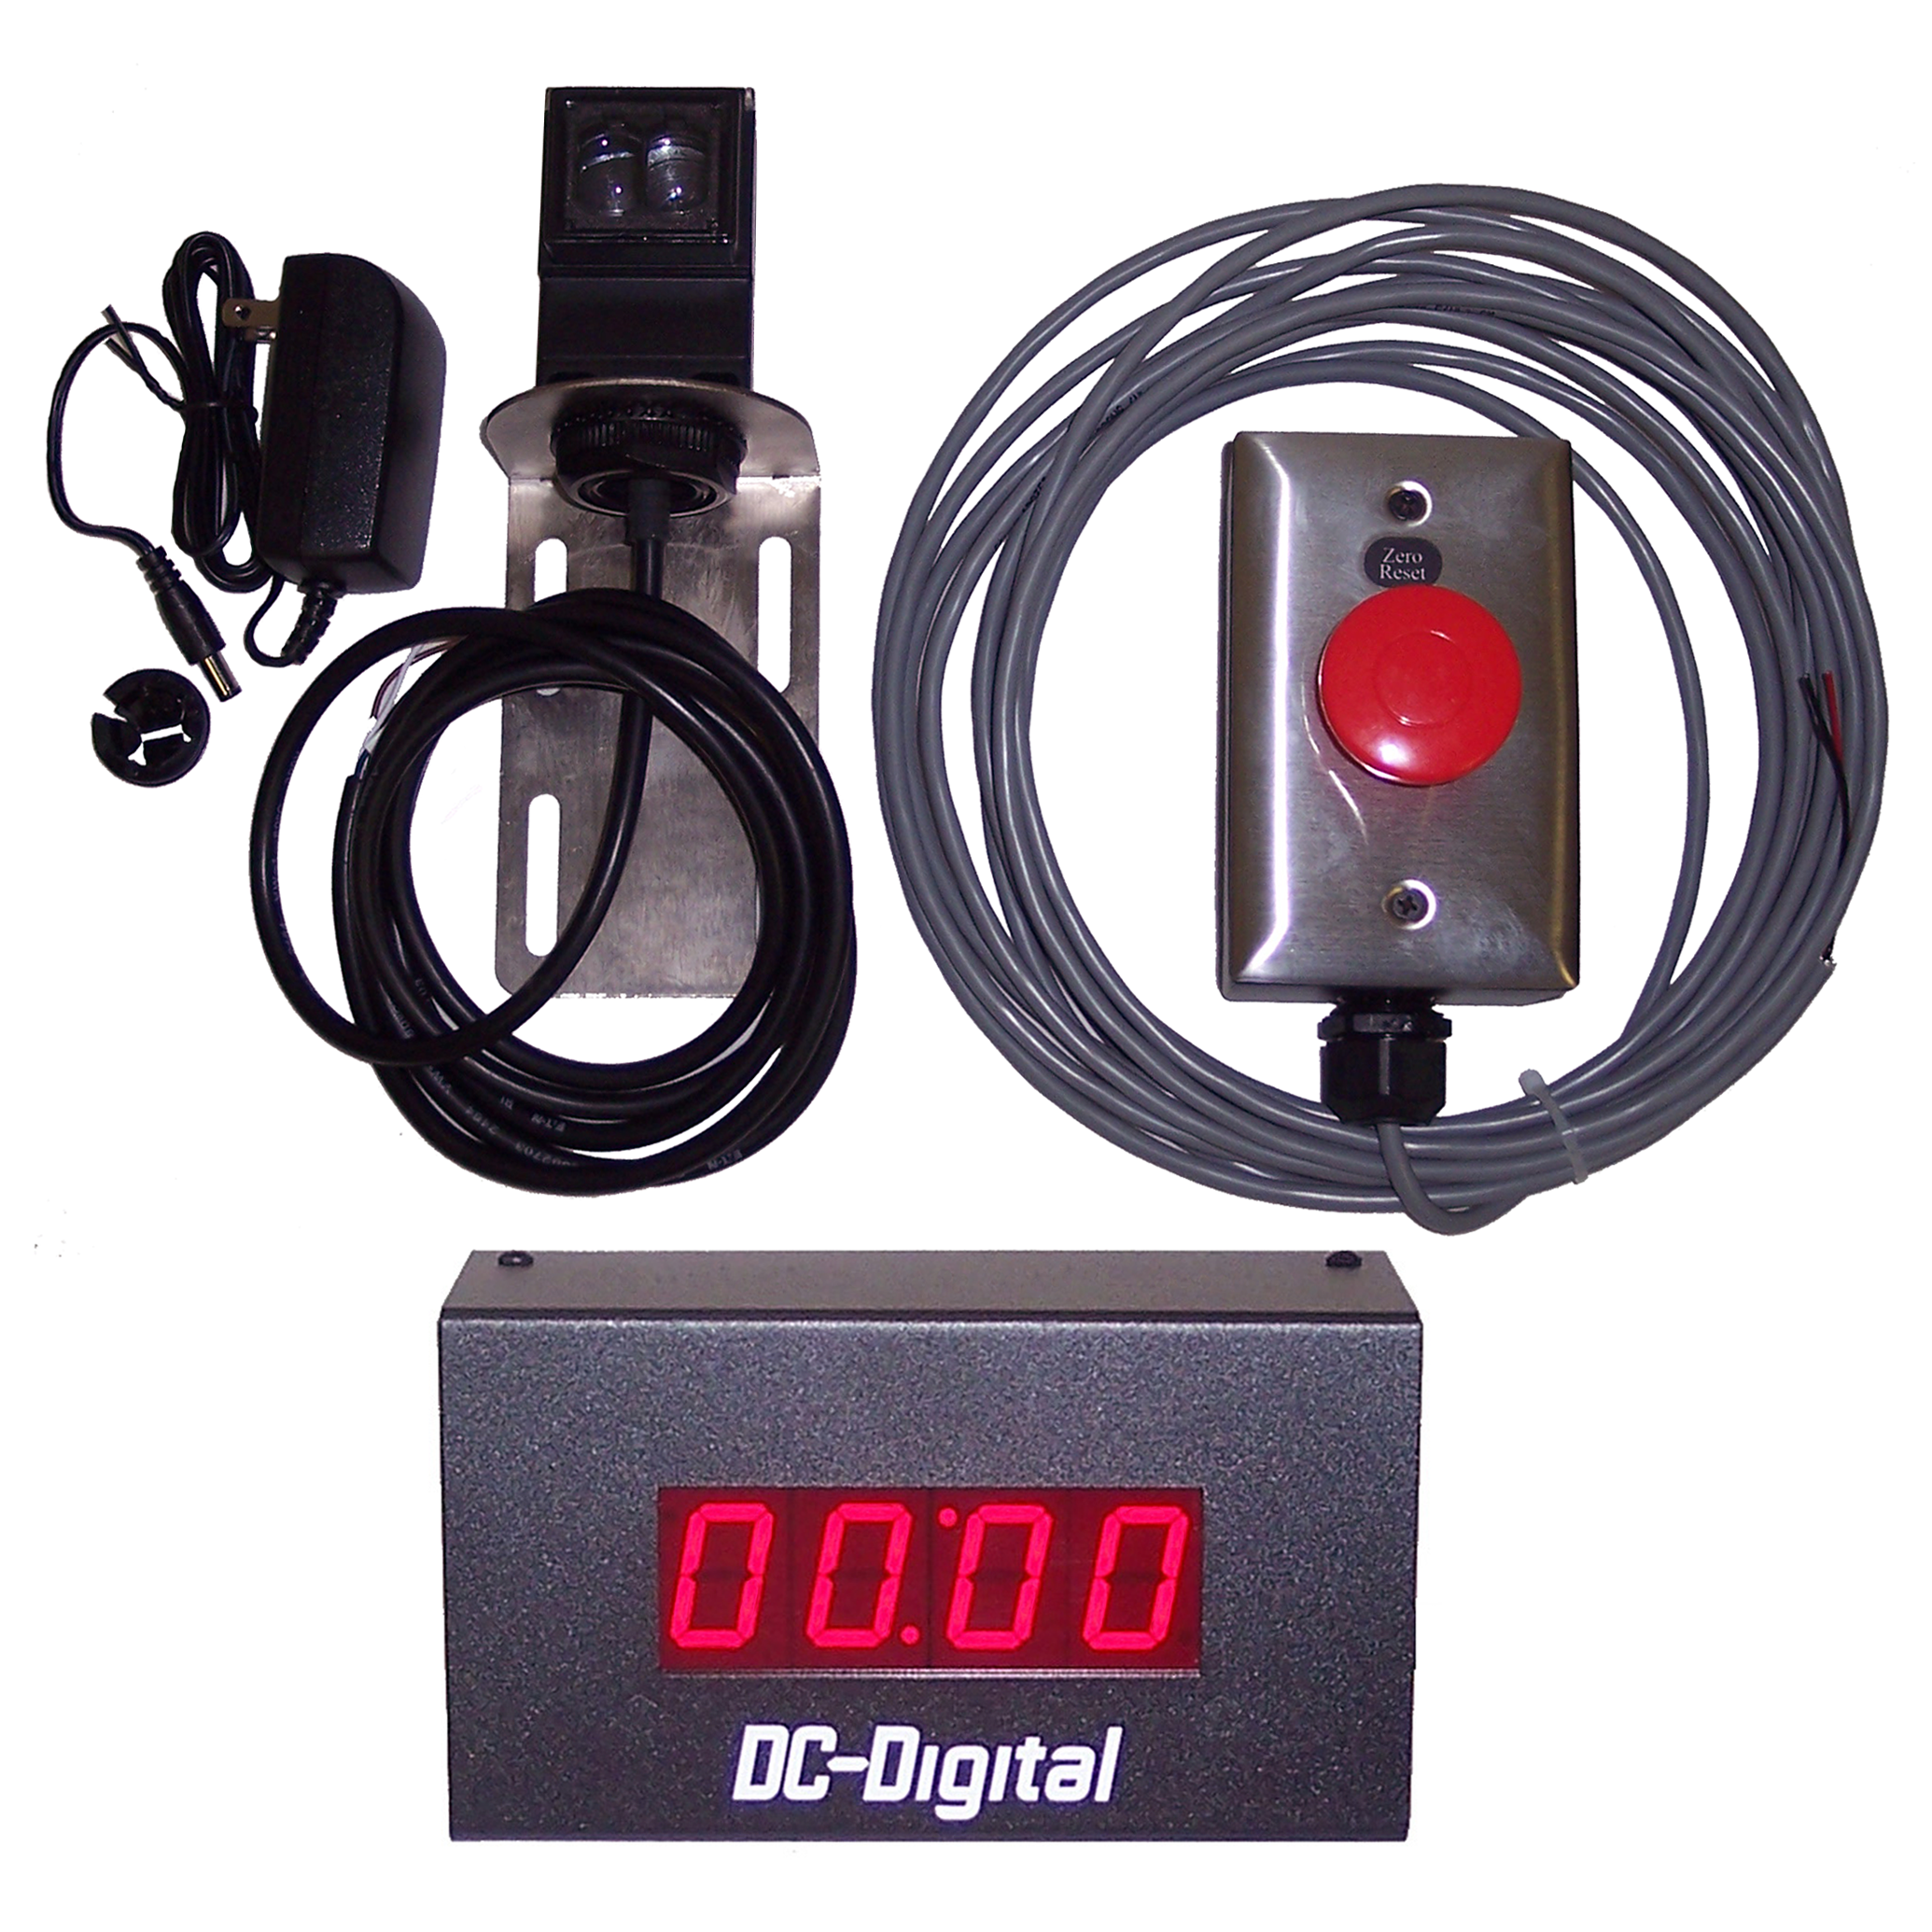 (DC-10T-UP-PKG) 1.0 Inch LED Digital, Process Count Up Timer Package, Includes: Long Range Diffused Photo-Reflective Sensor and Mount (adj. to 10 Feet), 40mm Reset Palm Switch (J-Box, Stainless Cover, 25ft. Cabling) and Power Supply "Ships FREE !"